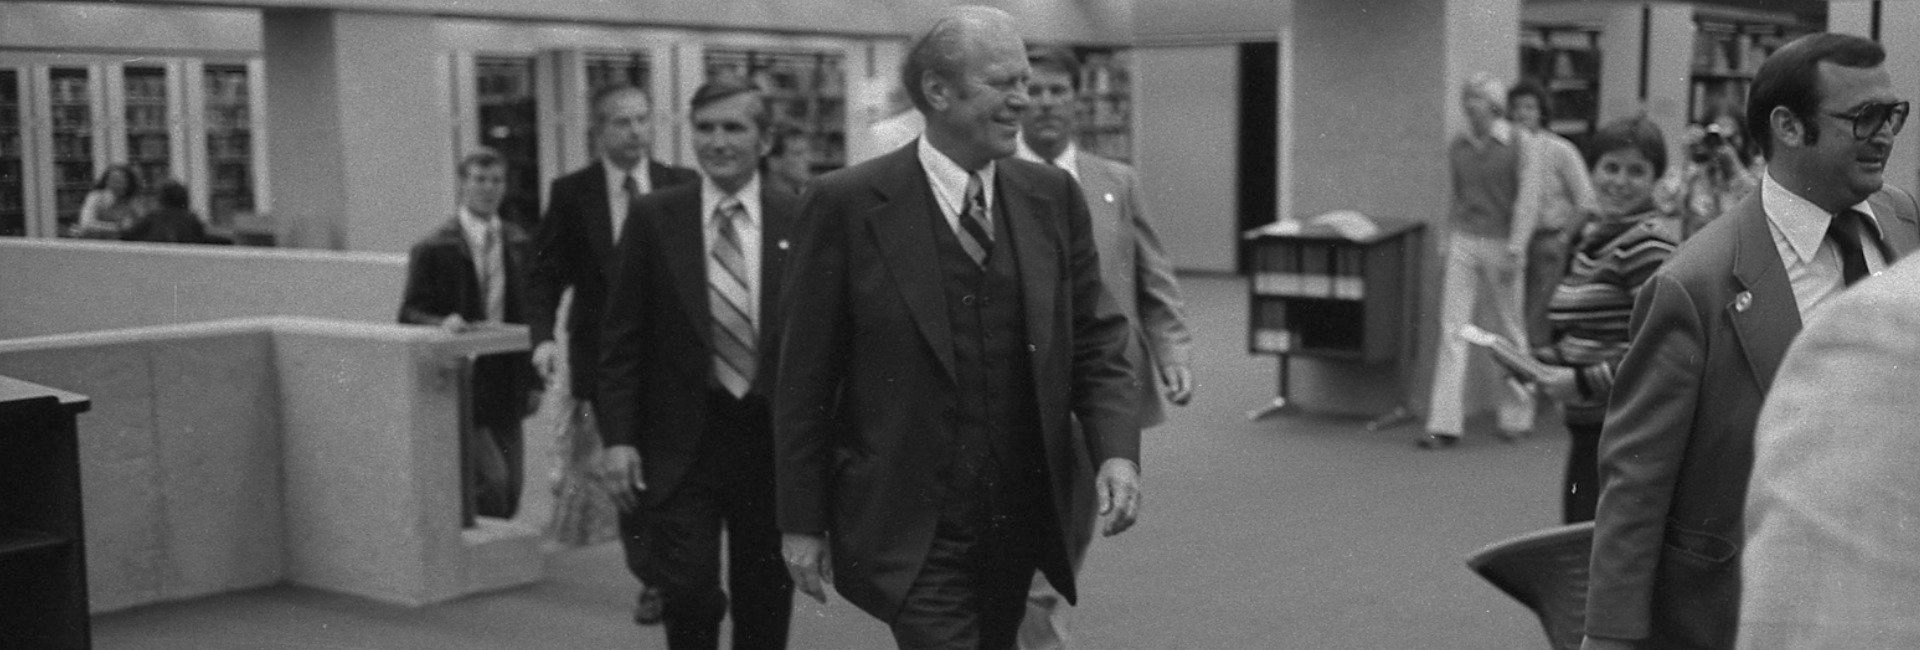 Gerald Ford at UNO